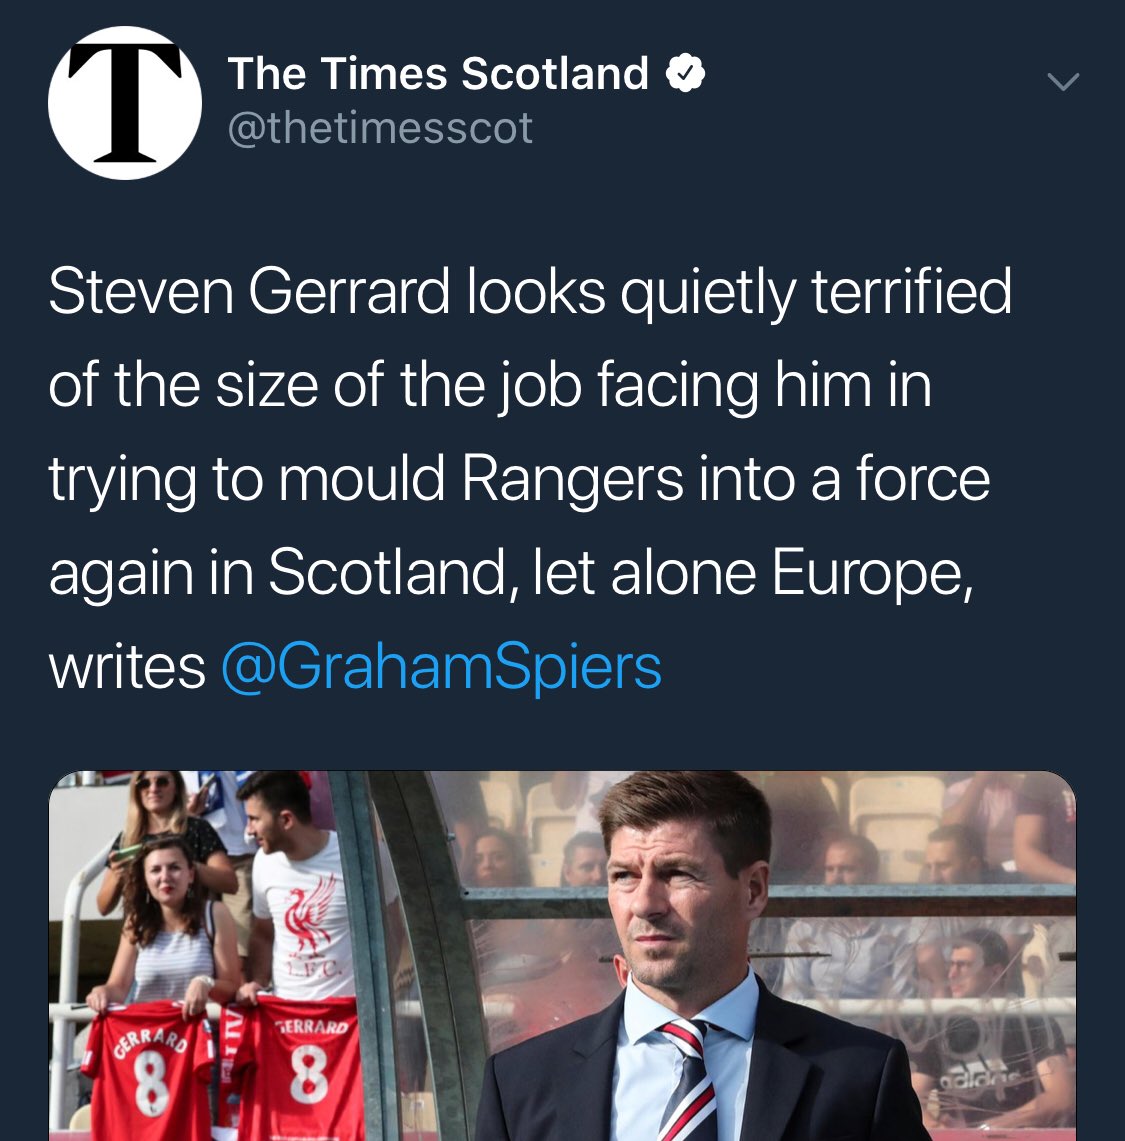 Graham Spiers couldn’t wait to stick the boot in. Basically claiming Steven Gerrard was shitting his pants at the challenge ahead.